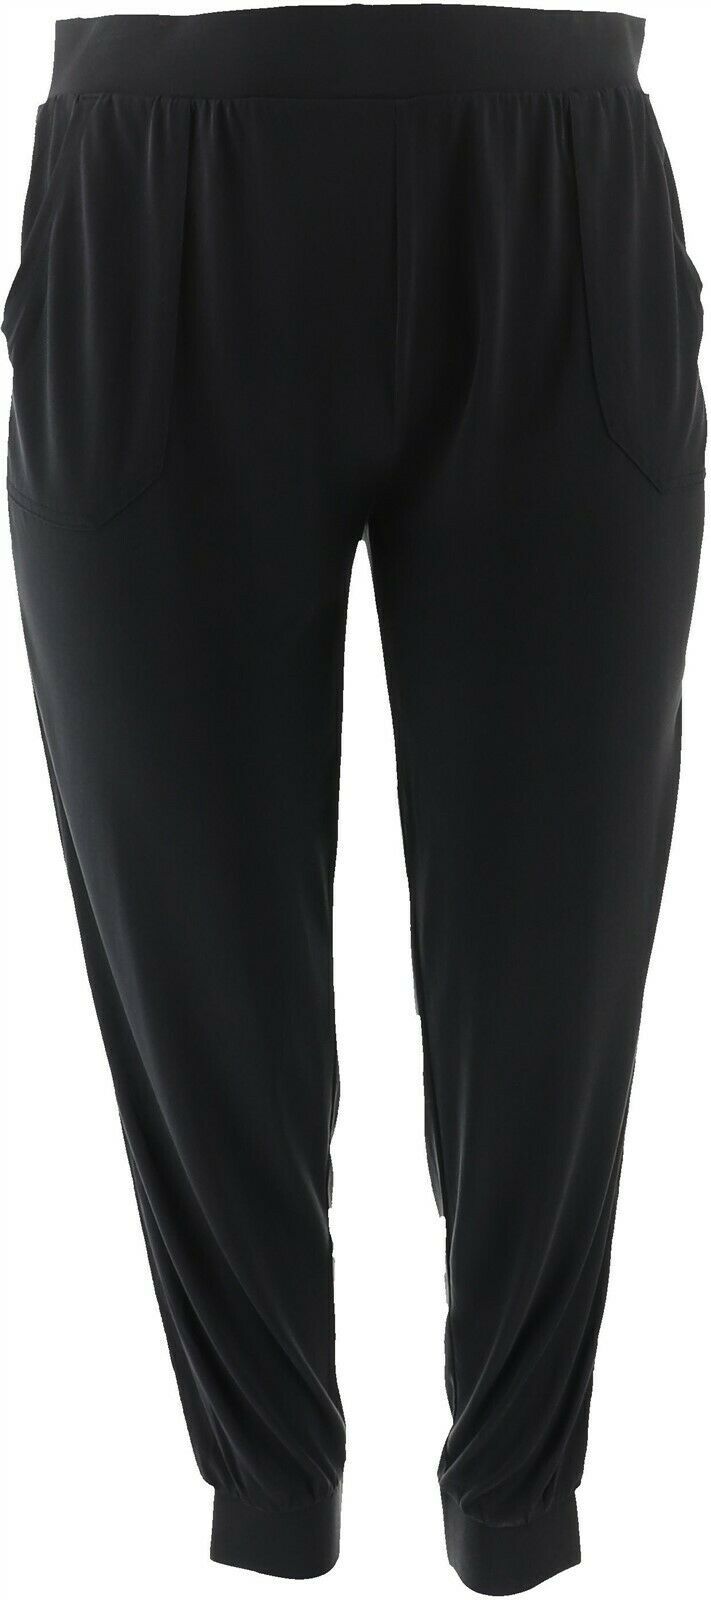 G Giuliana Luxe Knit Ankle Pant BLACK S Petite NEW 658-852